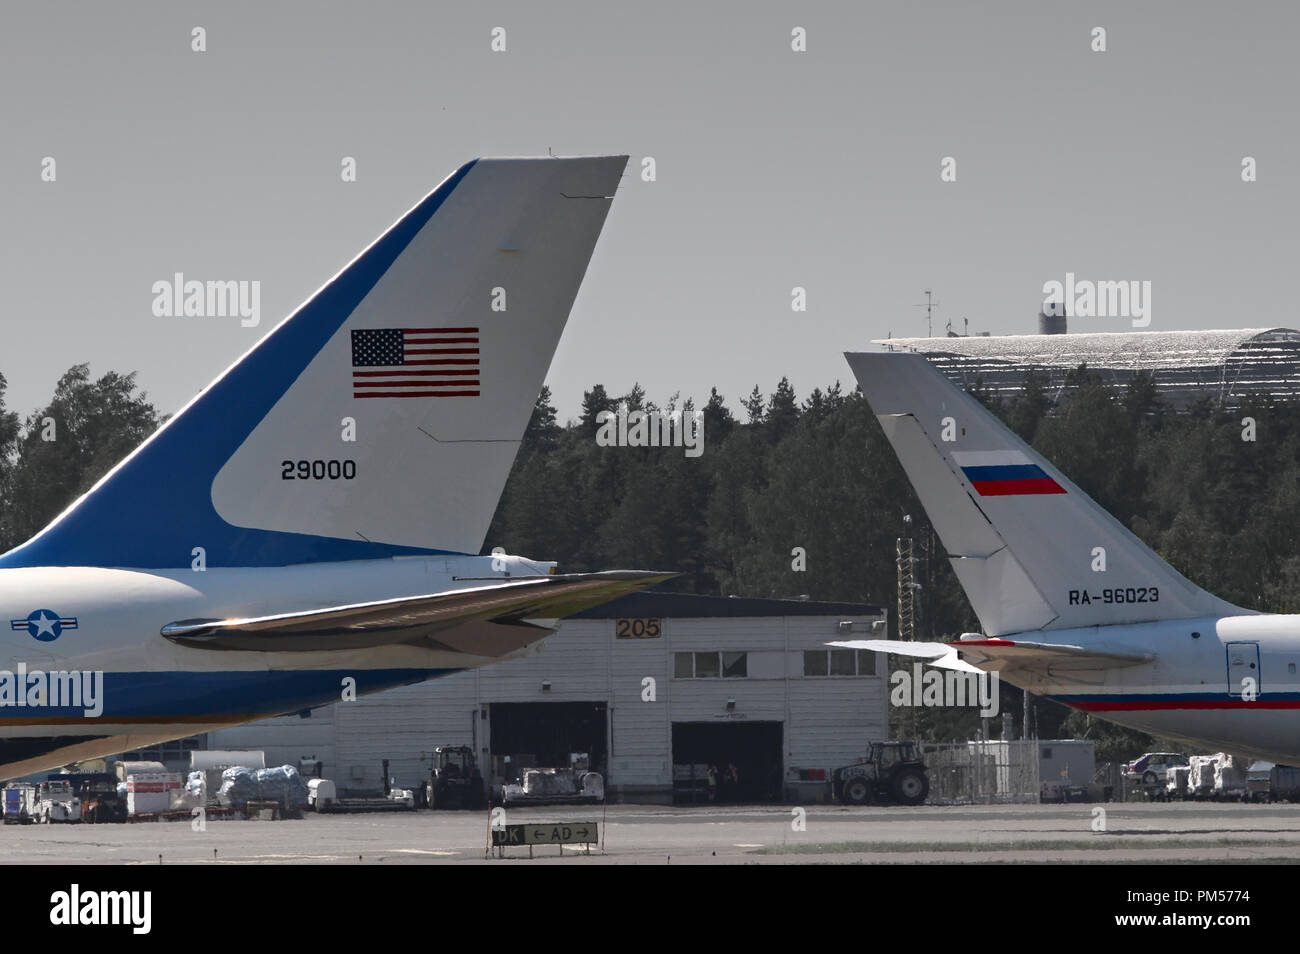 Donald Trump's Boeing 747 and Vladimir Putin's IL-96 parked together in Helsinki-Vantaa airport during presidents meeting in Helsinki. 16.07.2018 Vant Stock Photo